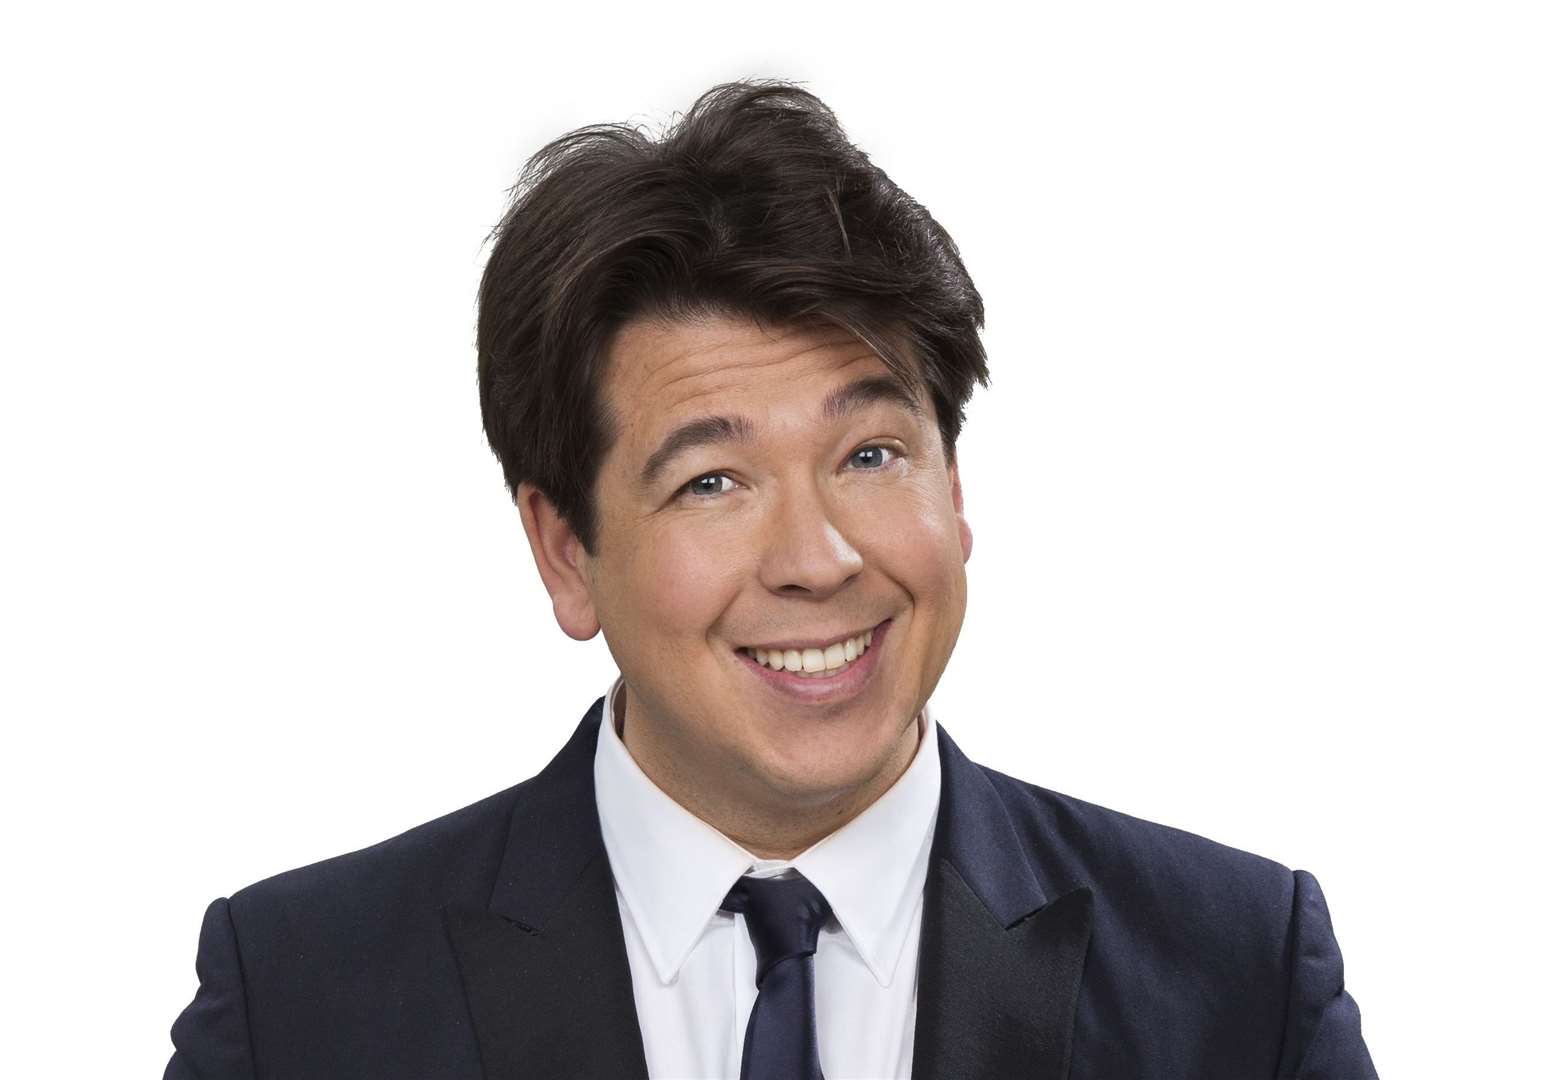 Michael McIntyre is coming to Canterbury later this month